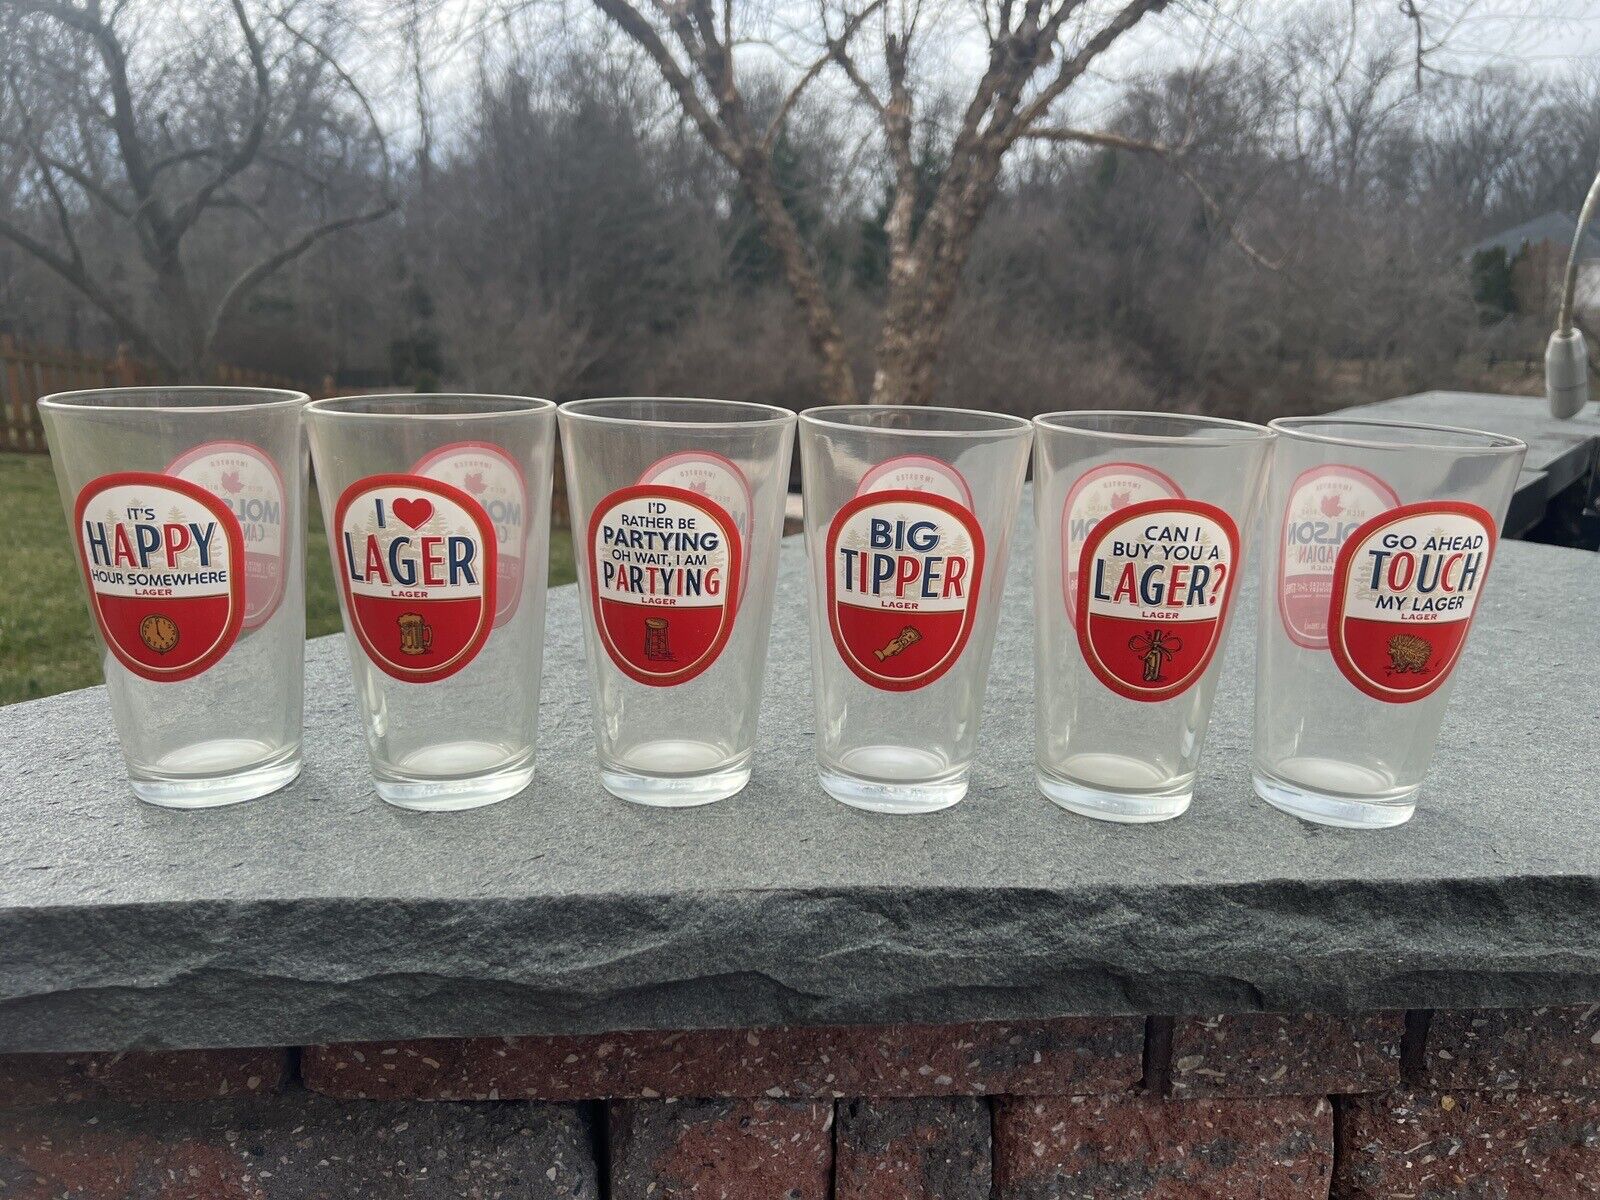 Lot 6 Molson Canadian Lager Beer Pint Glasses ALL Different Sayings